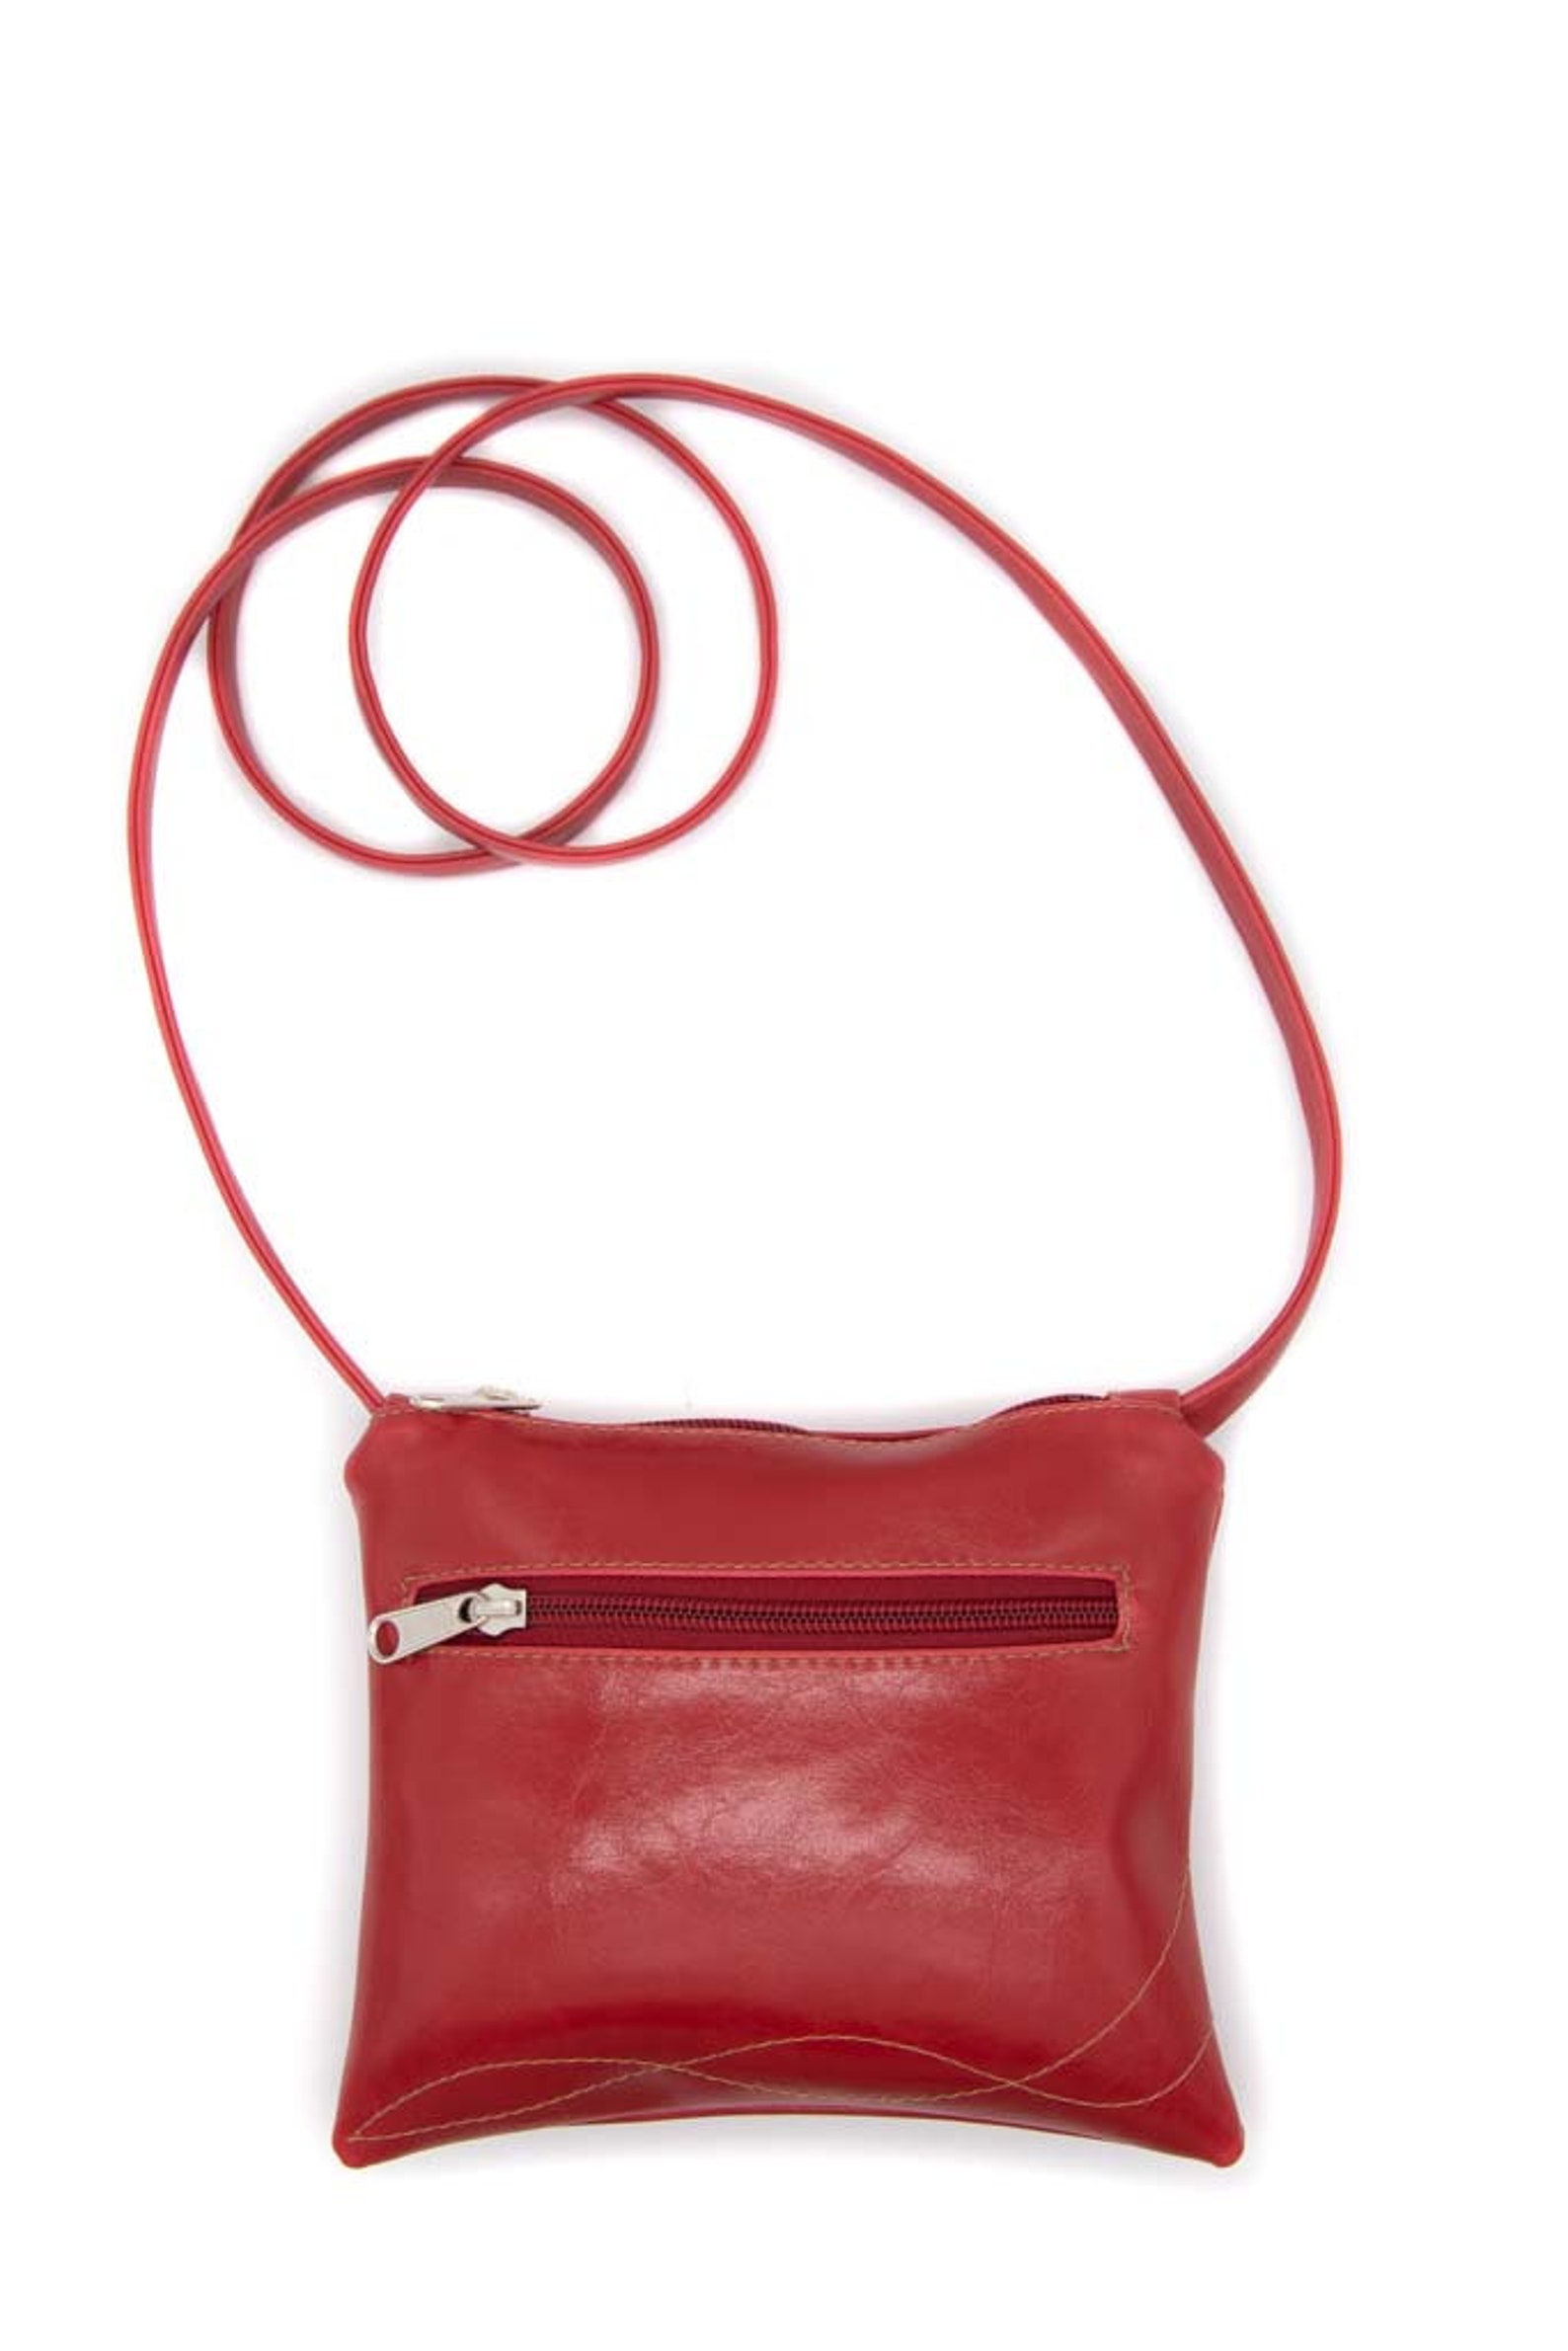 Small Red Crossbody Bag Made With Vegan Leather Red Small - Etsy Sweden